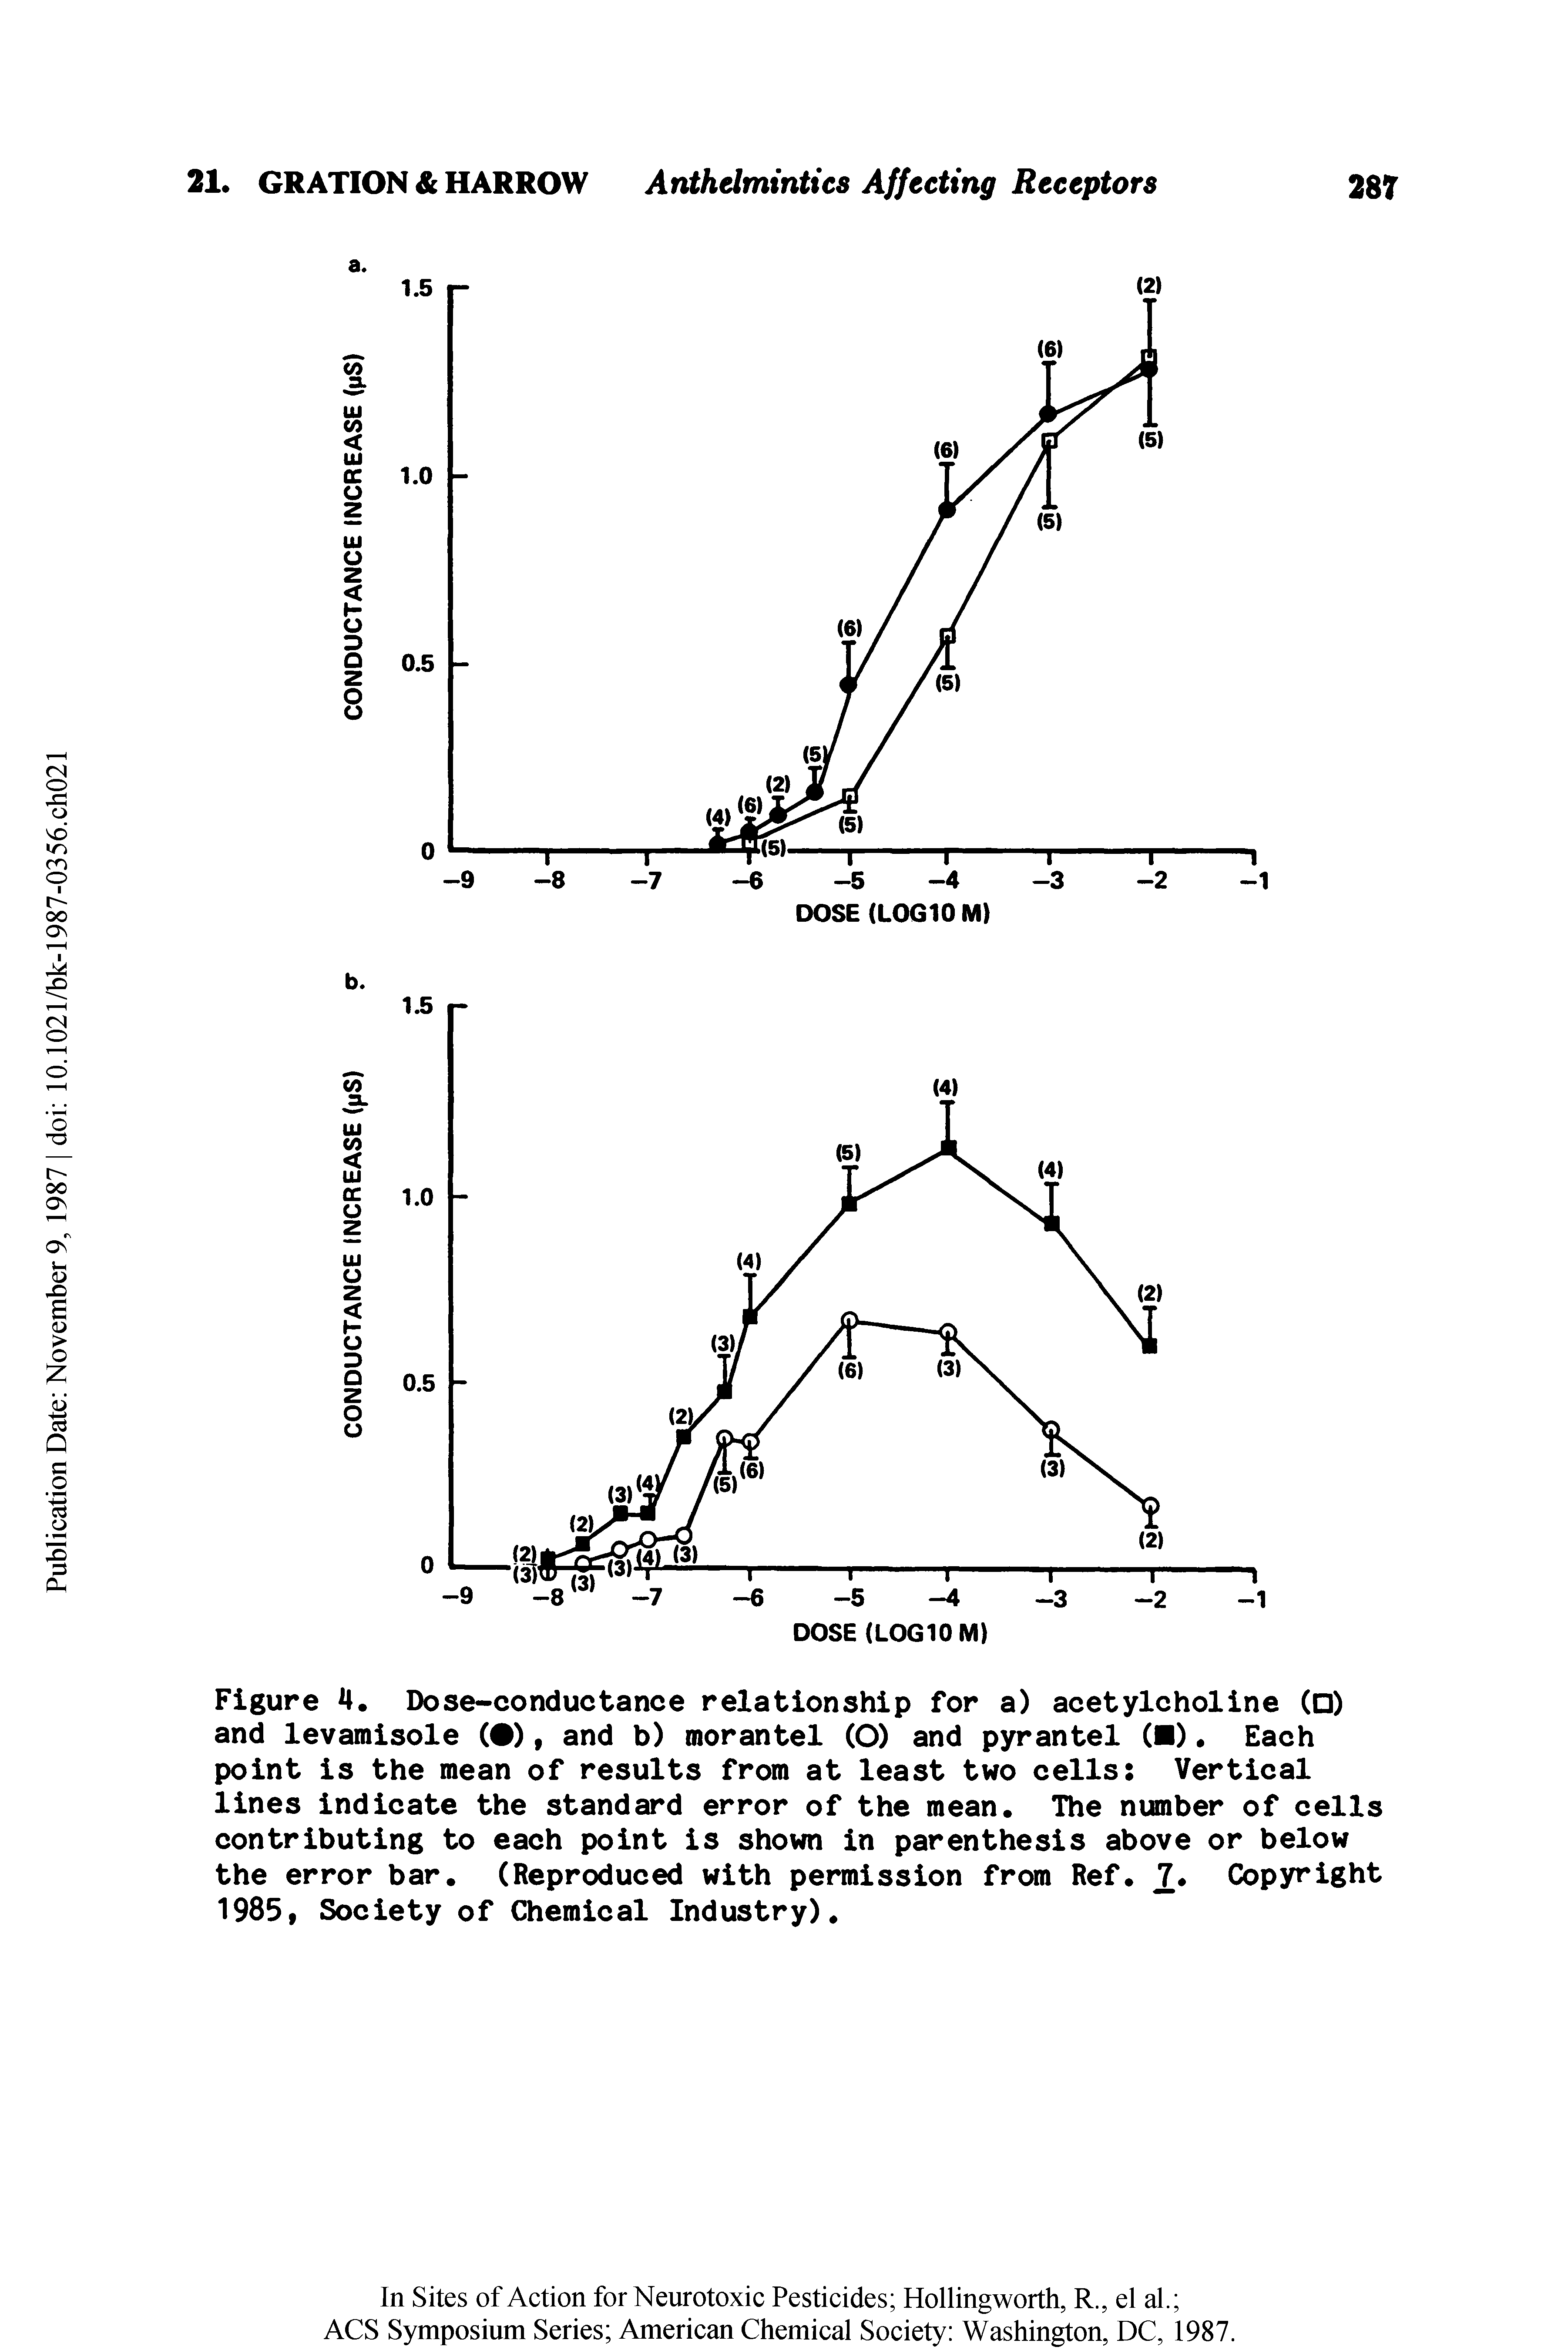 Figure 4. Dose-conductance relationship for a) acetylcholine ( ) and levamisole ( ), and b) morantel (O) and pyrantel ( ). Each point is the mean of results from at least two cells Vertical lines indicate the standard error of the mean. The number of cells contributing to each point is shown in parenthesis above or below the error bar. (Reproduced with permission from Ref. 2 Copyright 1985, Society of Chemical Industry).